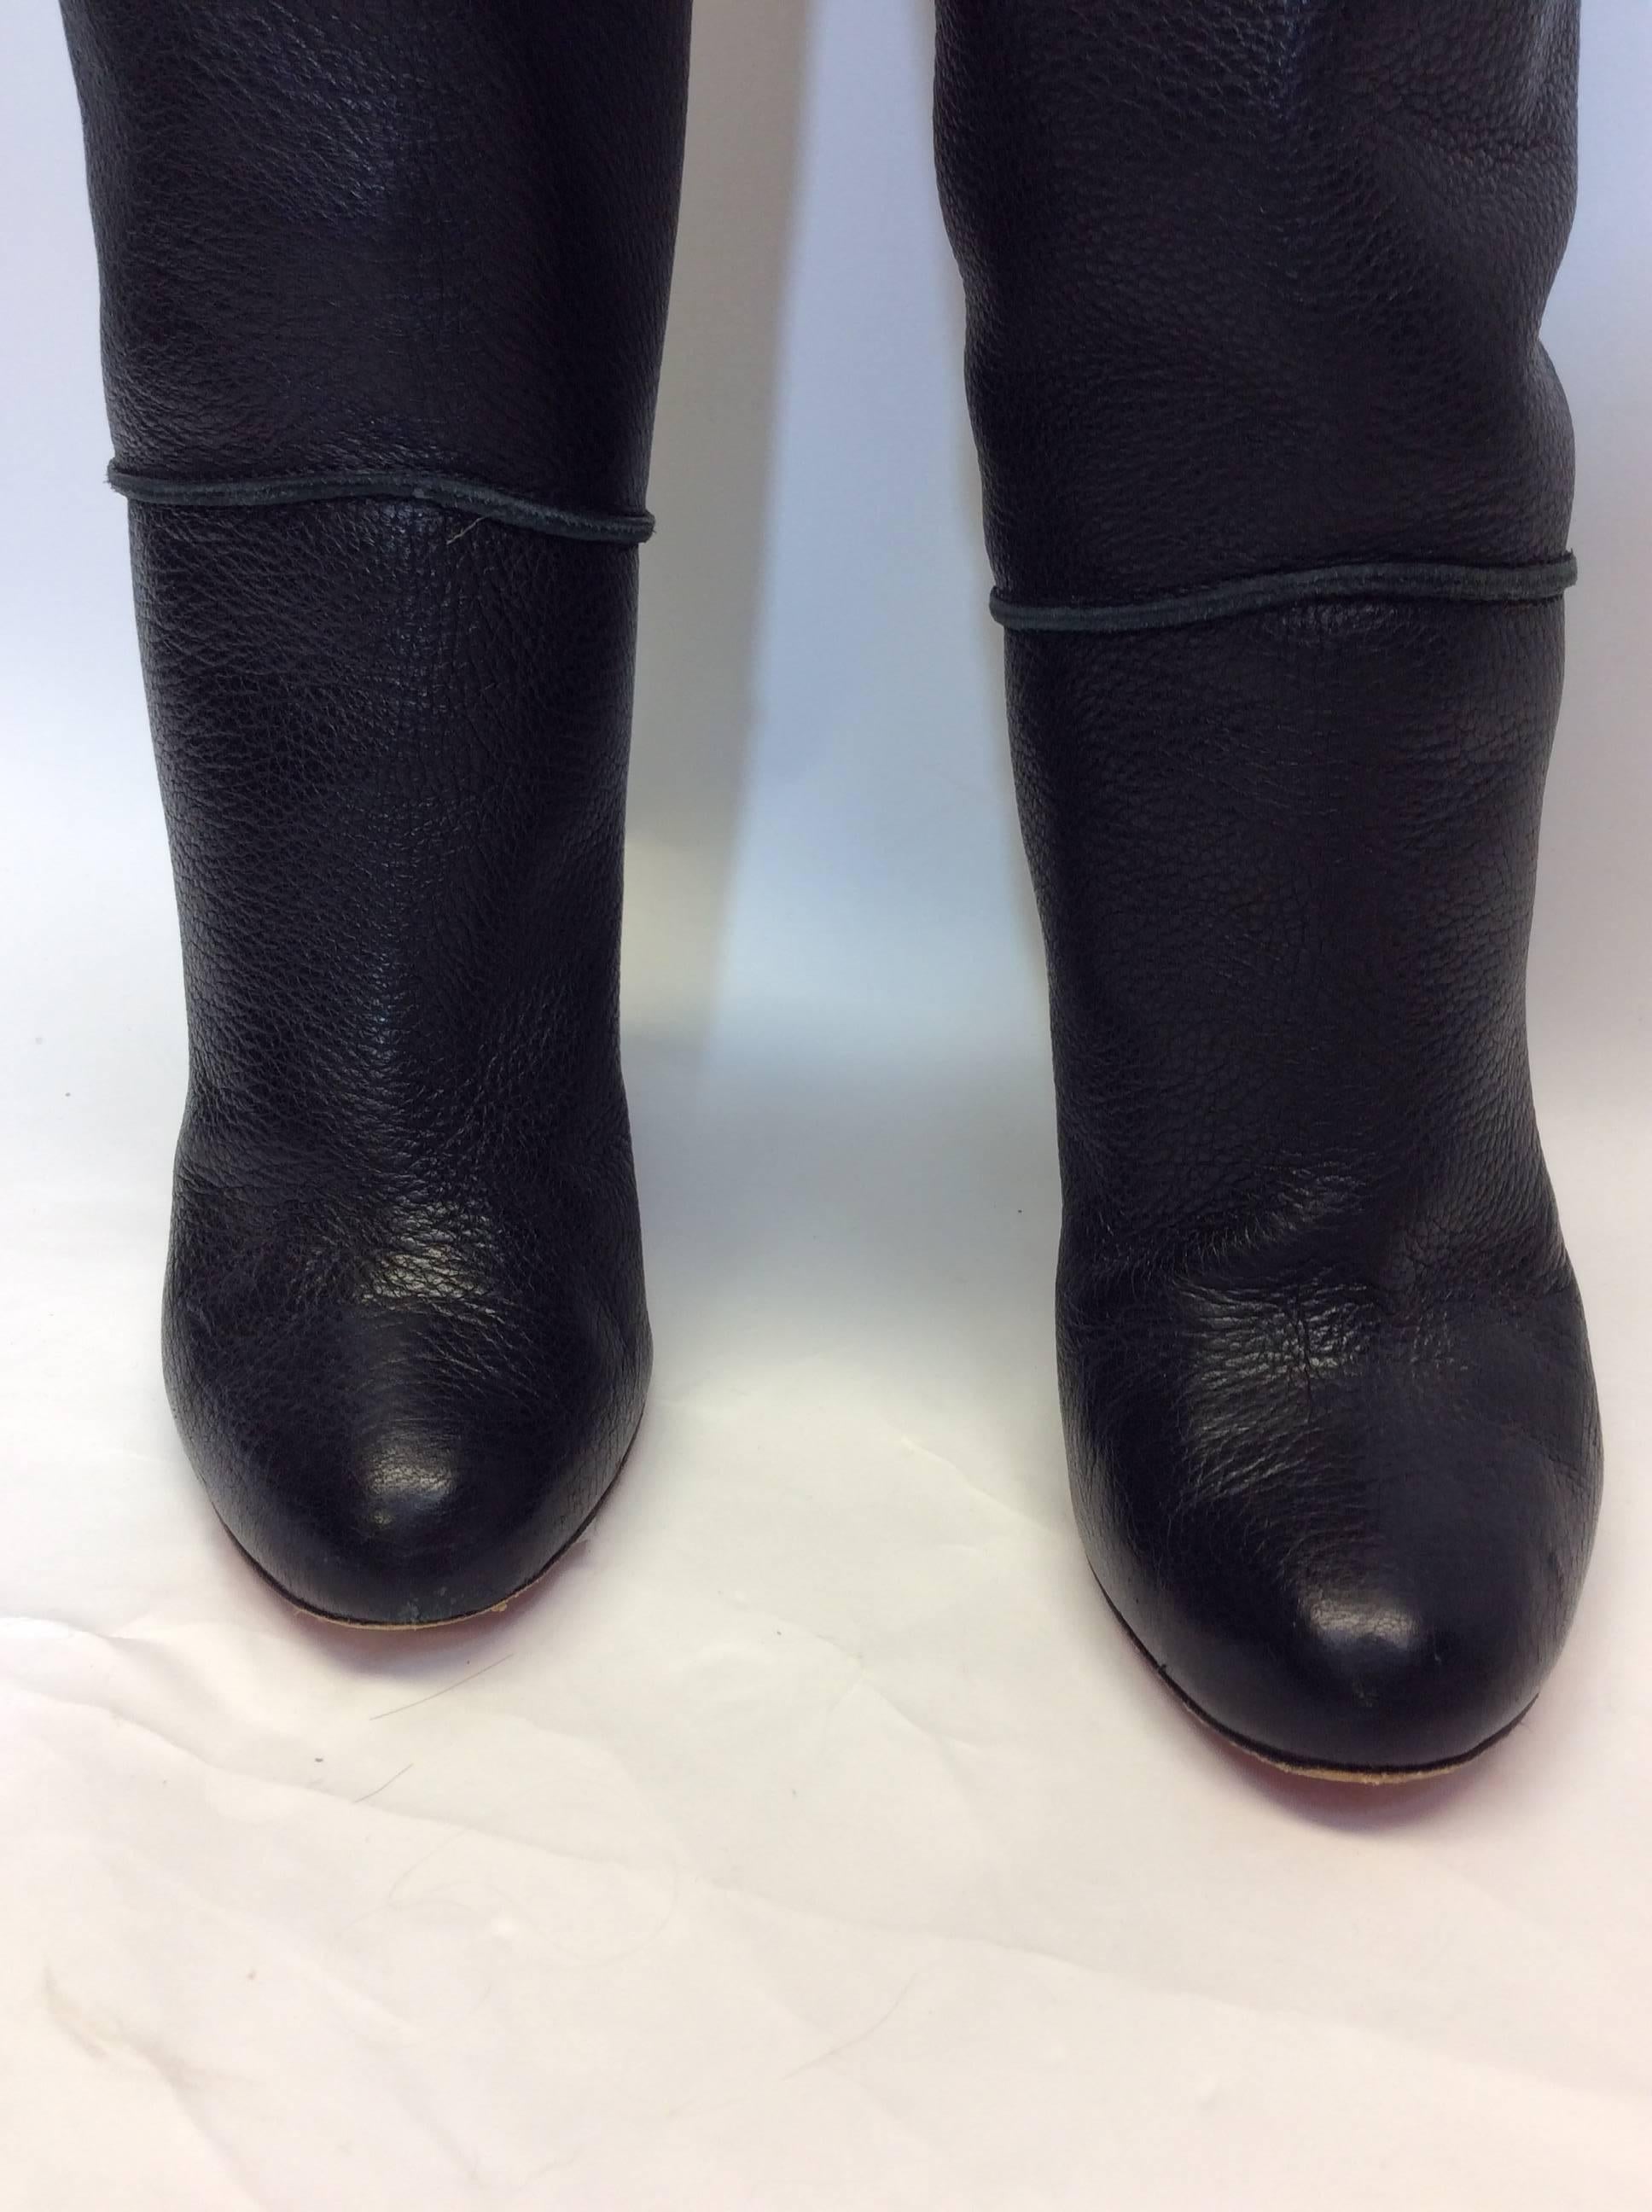 Christian Louboutin Black Over The Knee Boots 
Over the knee style
100% leather 
Size 36.5 
Made in Italy 
4 inch heel 
$699